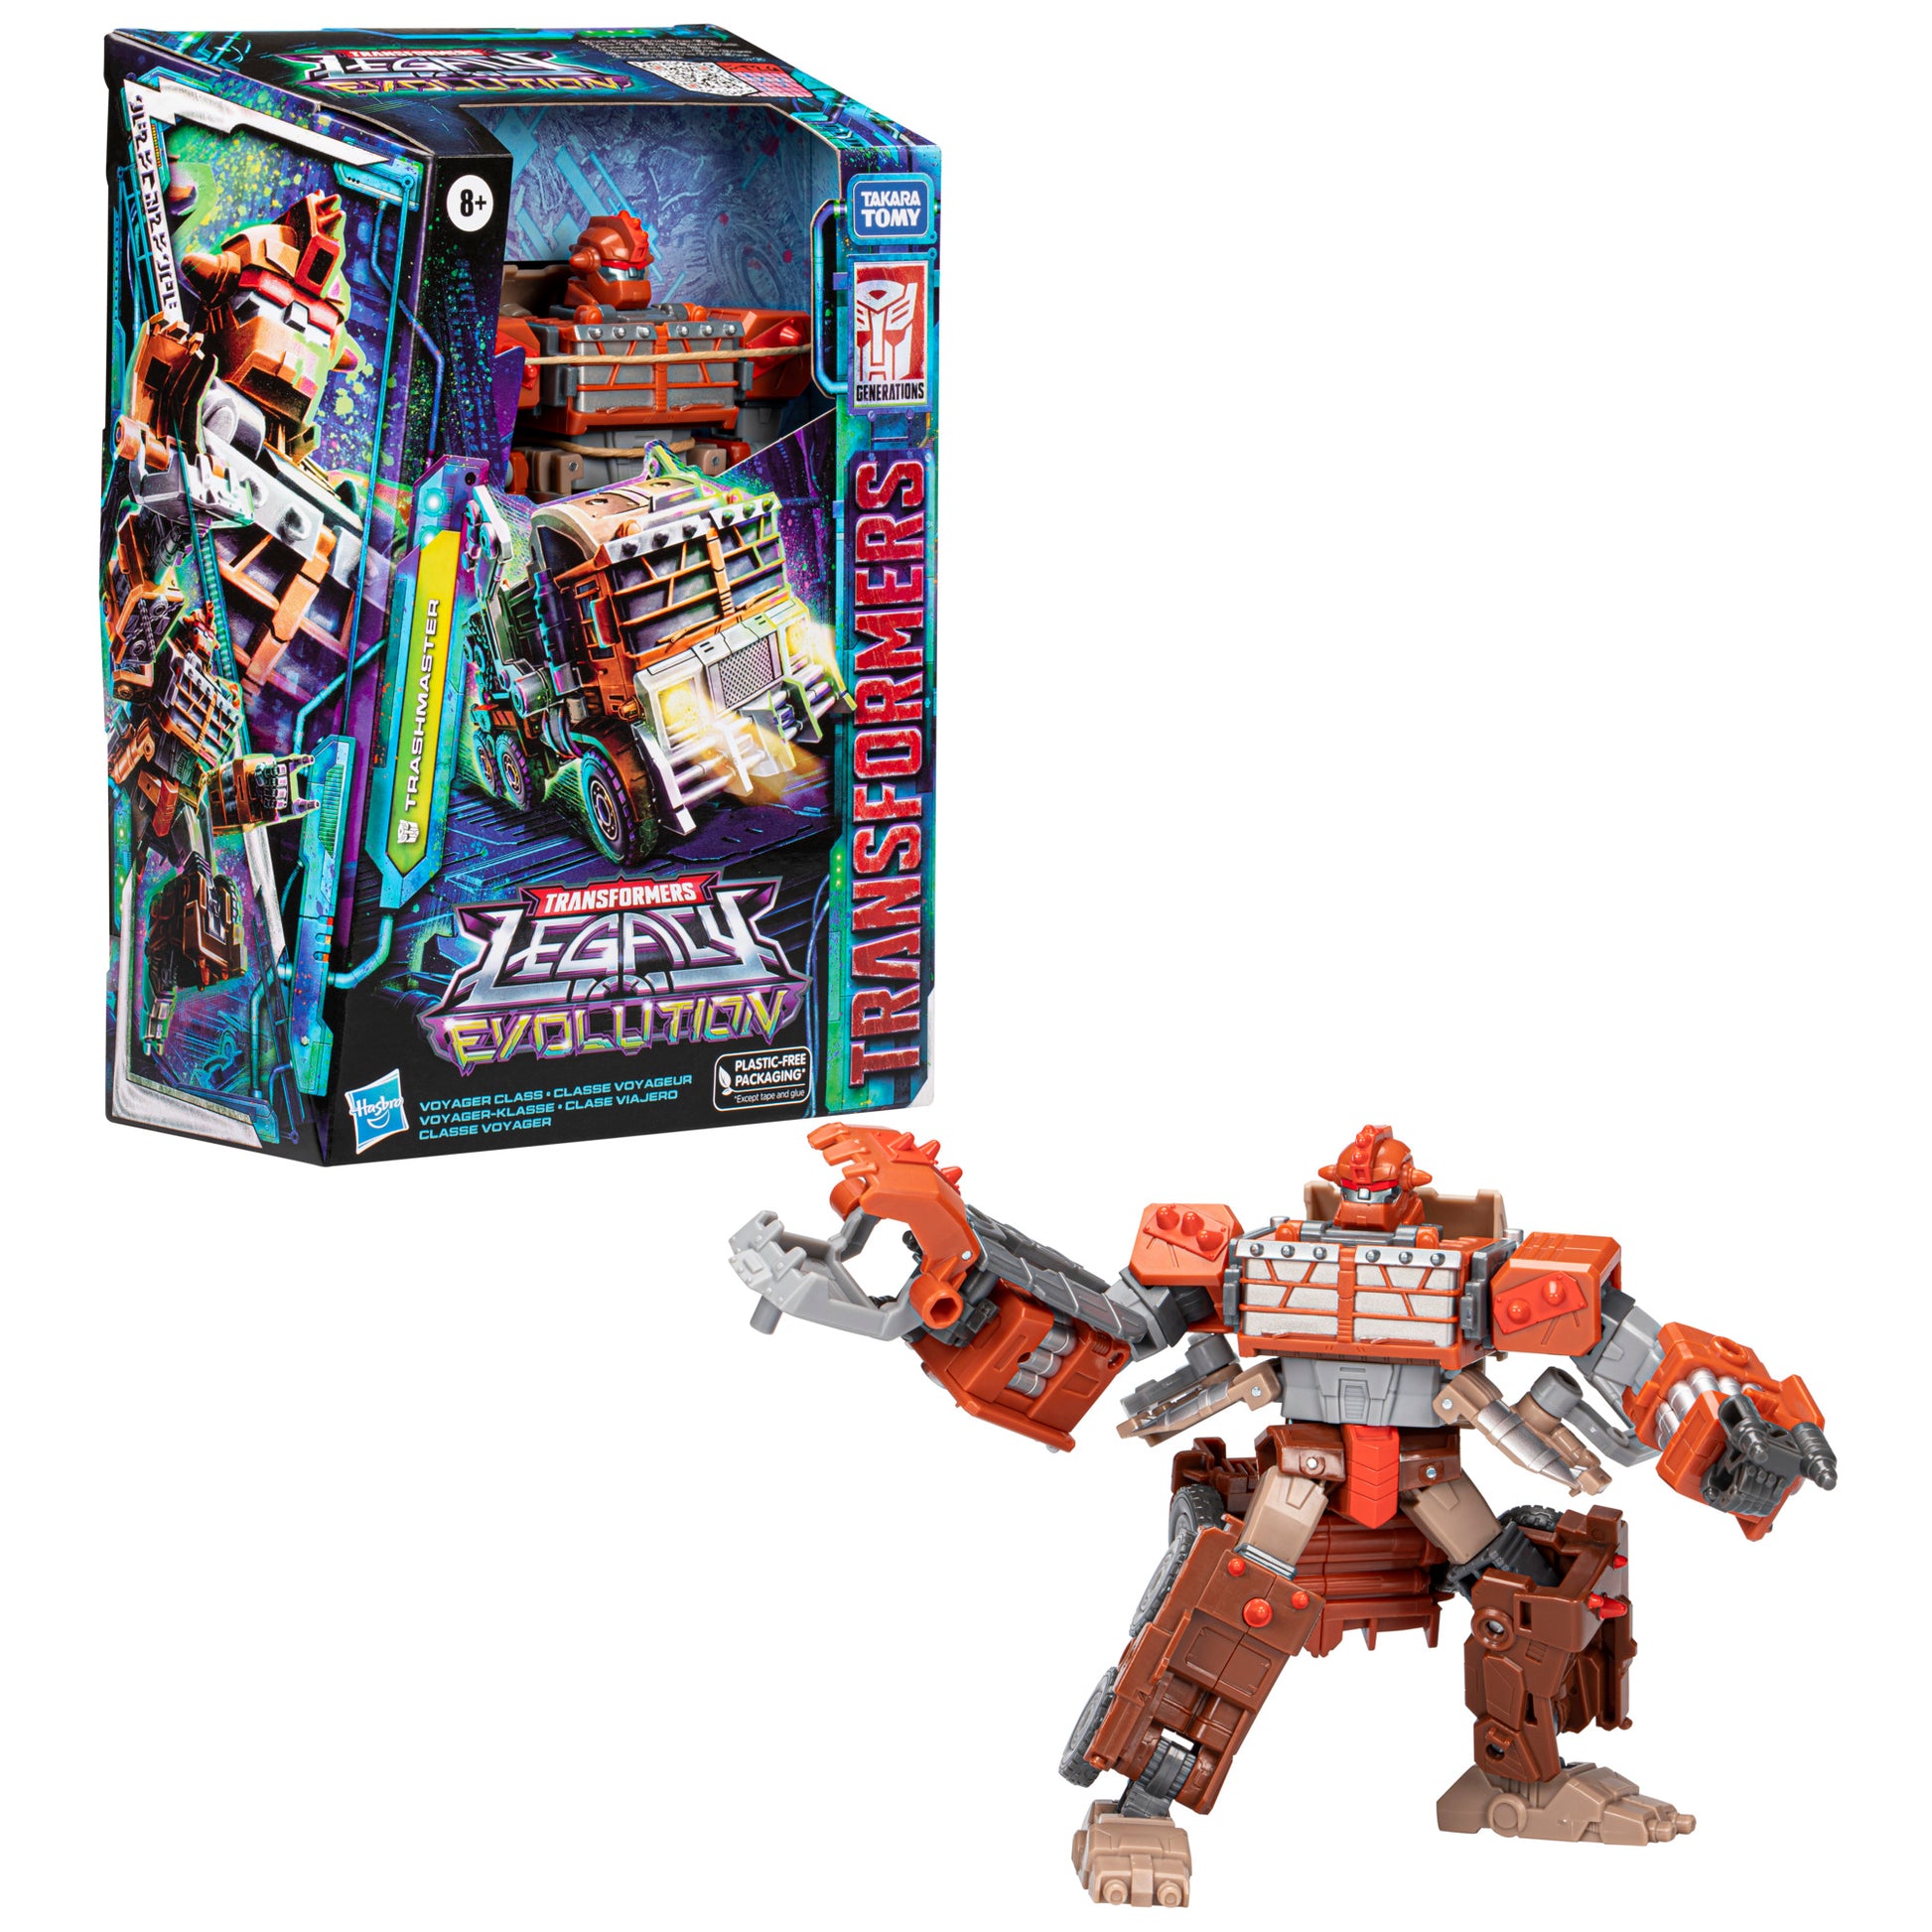 Transformers Legacy Evolution Voyager Class Trashmaster Action Figure Toy - Heretoserveyou